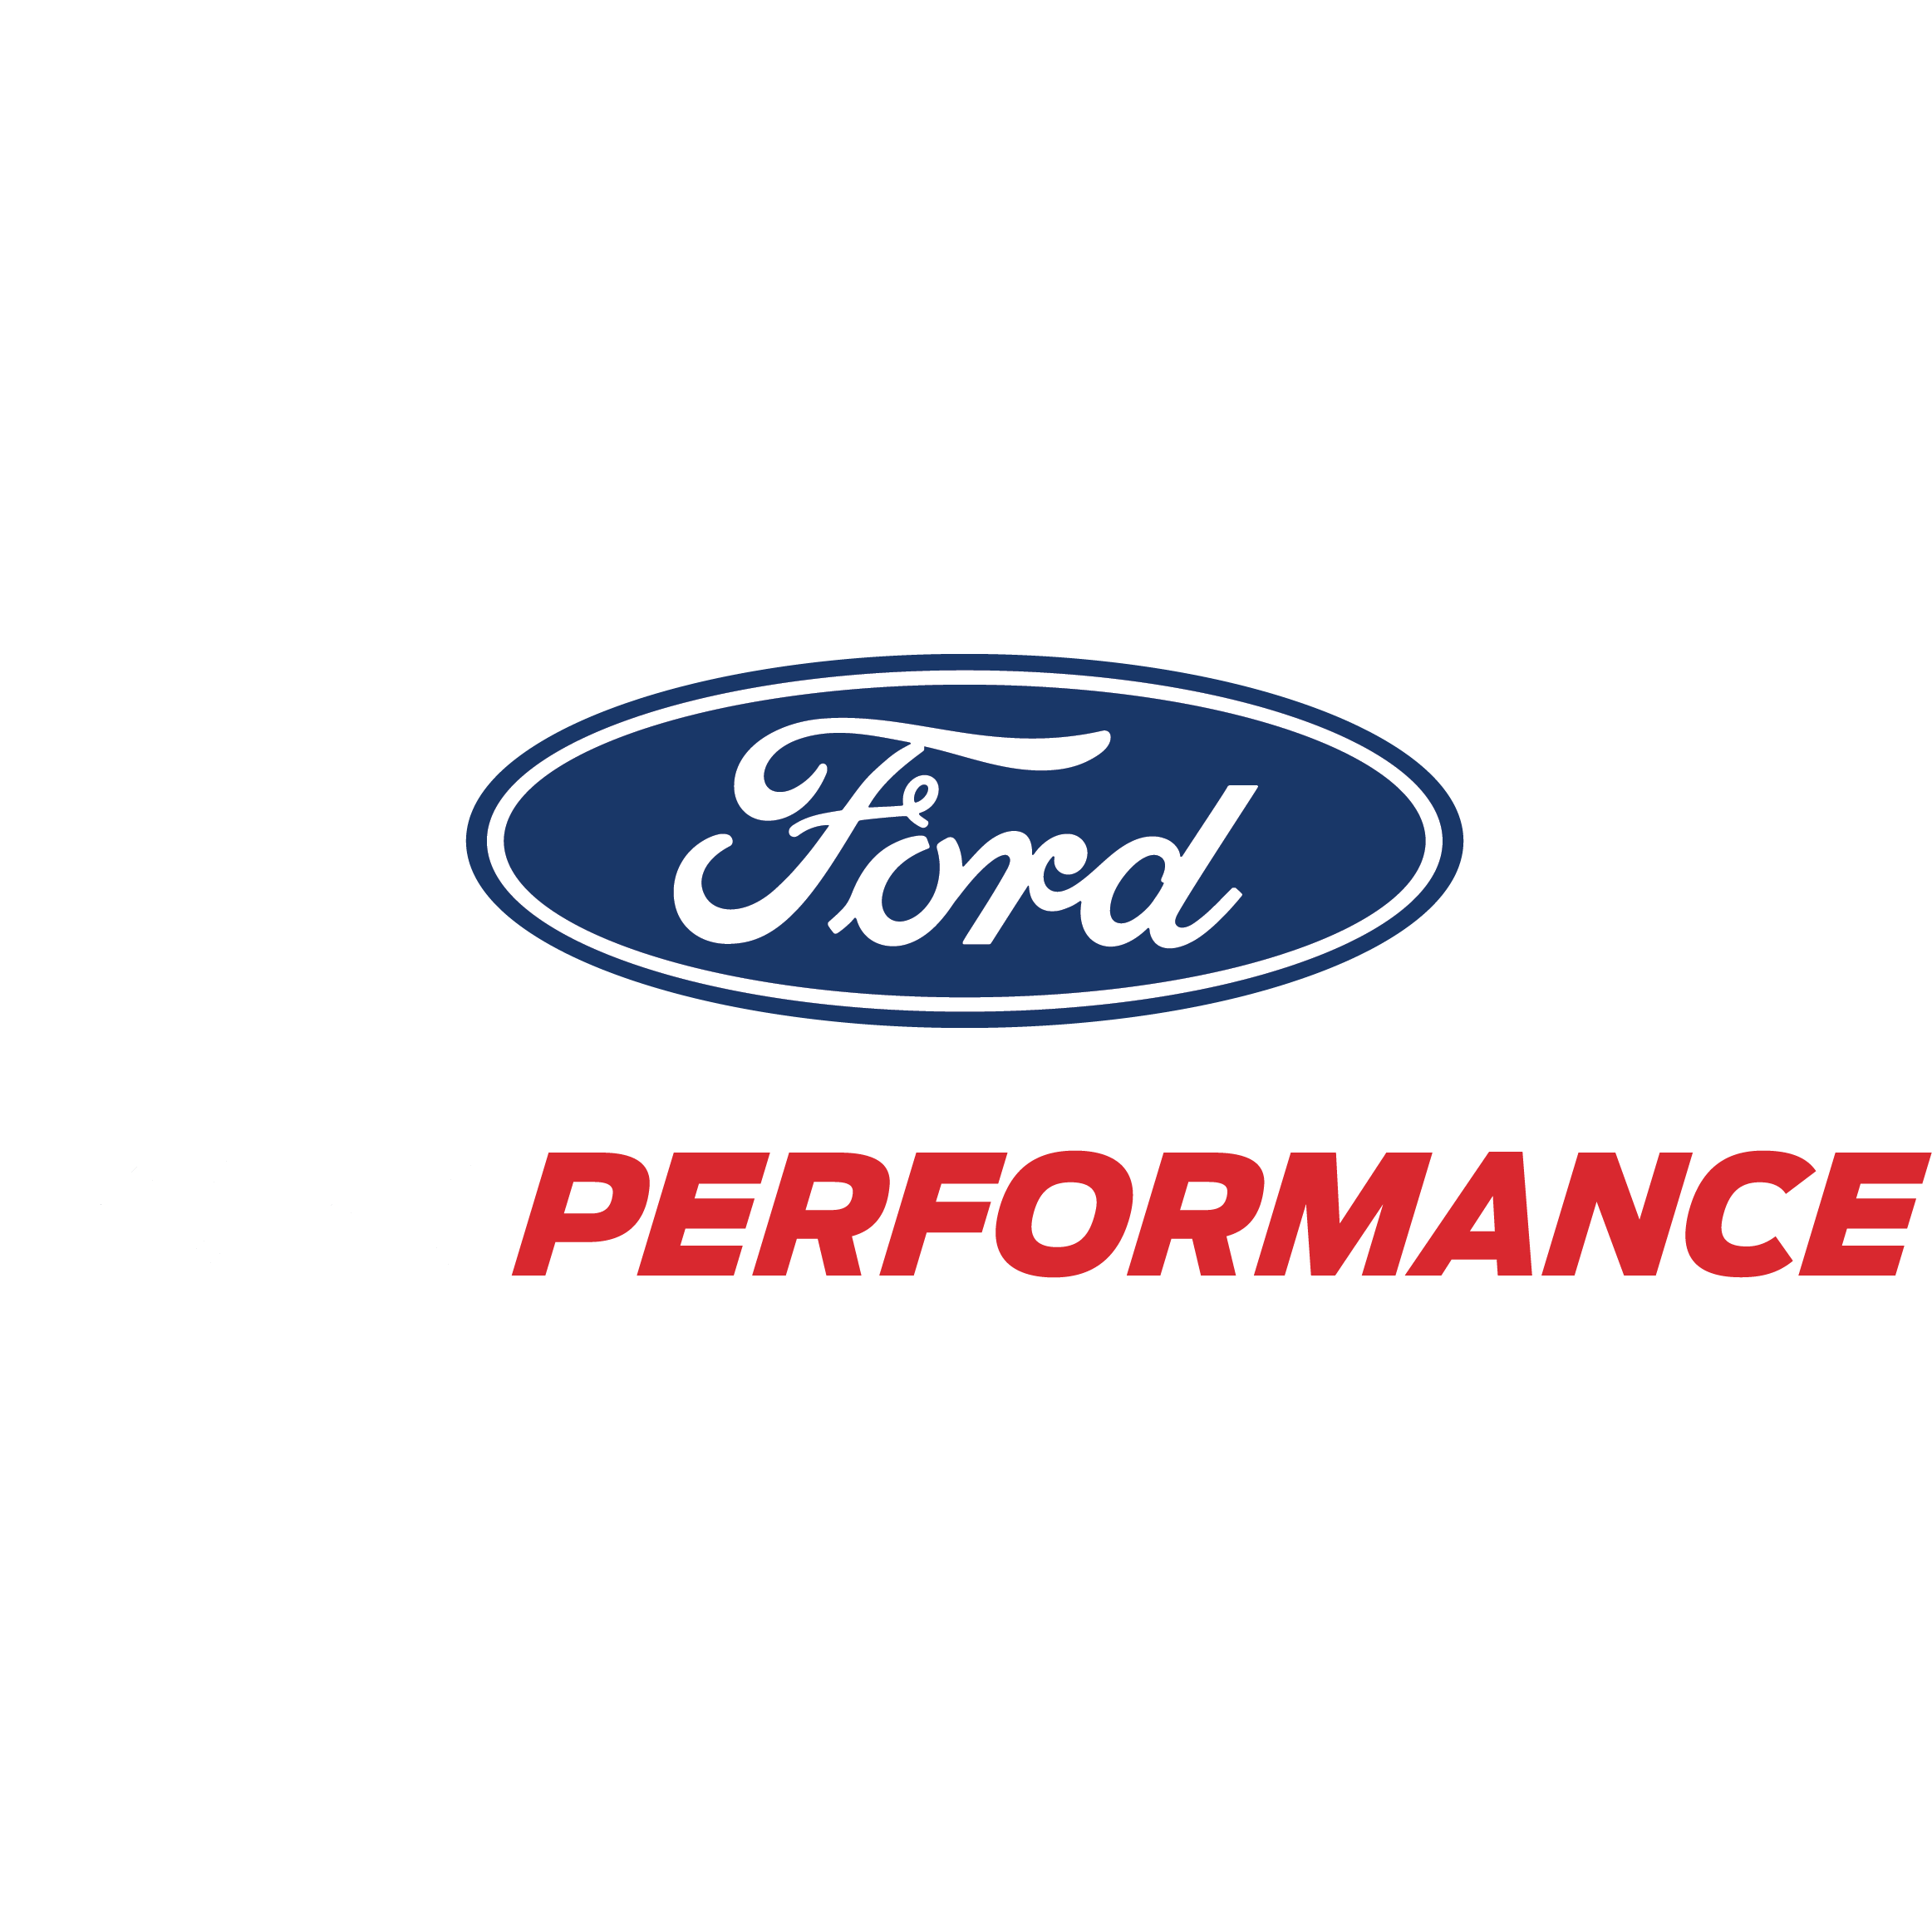 Ford_performance_brand_logo white.png